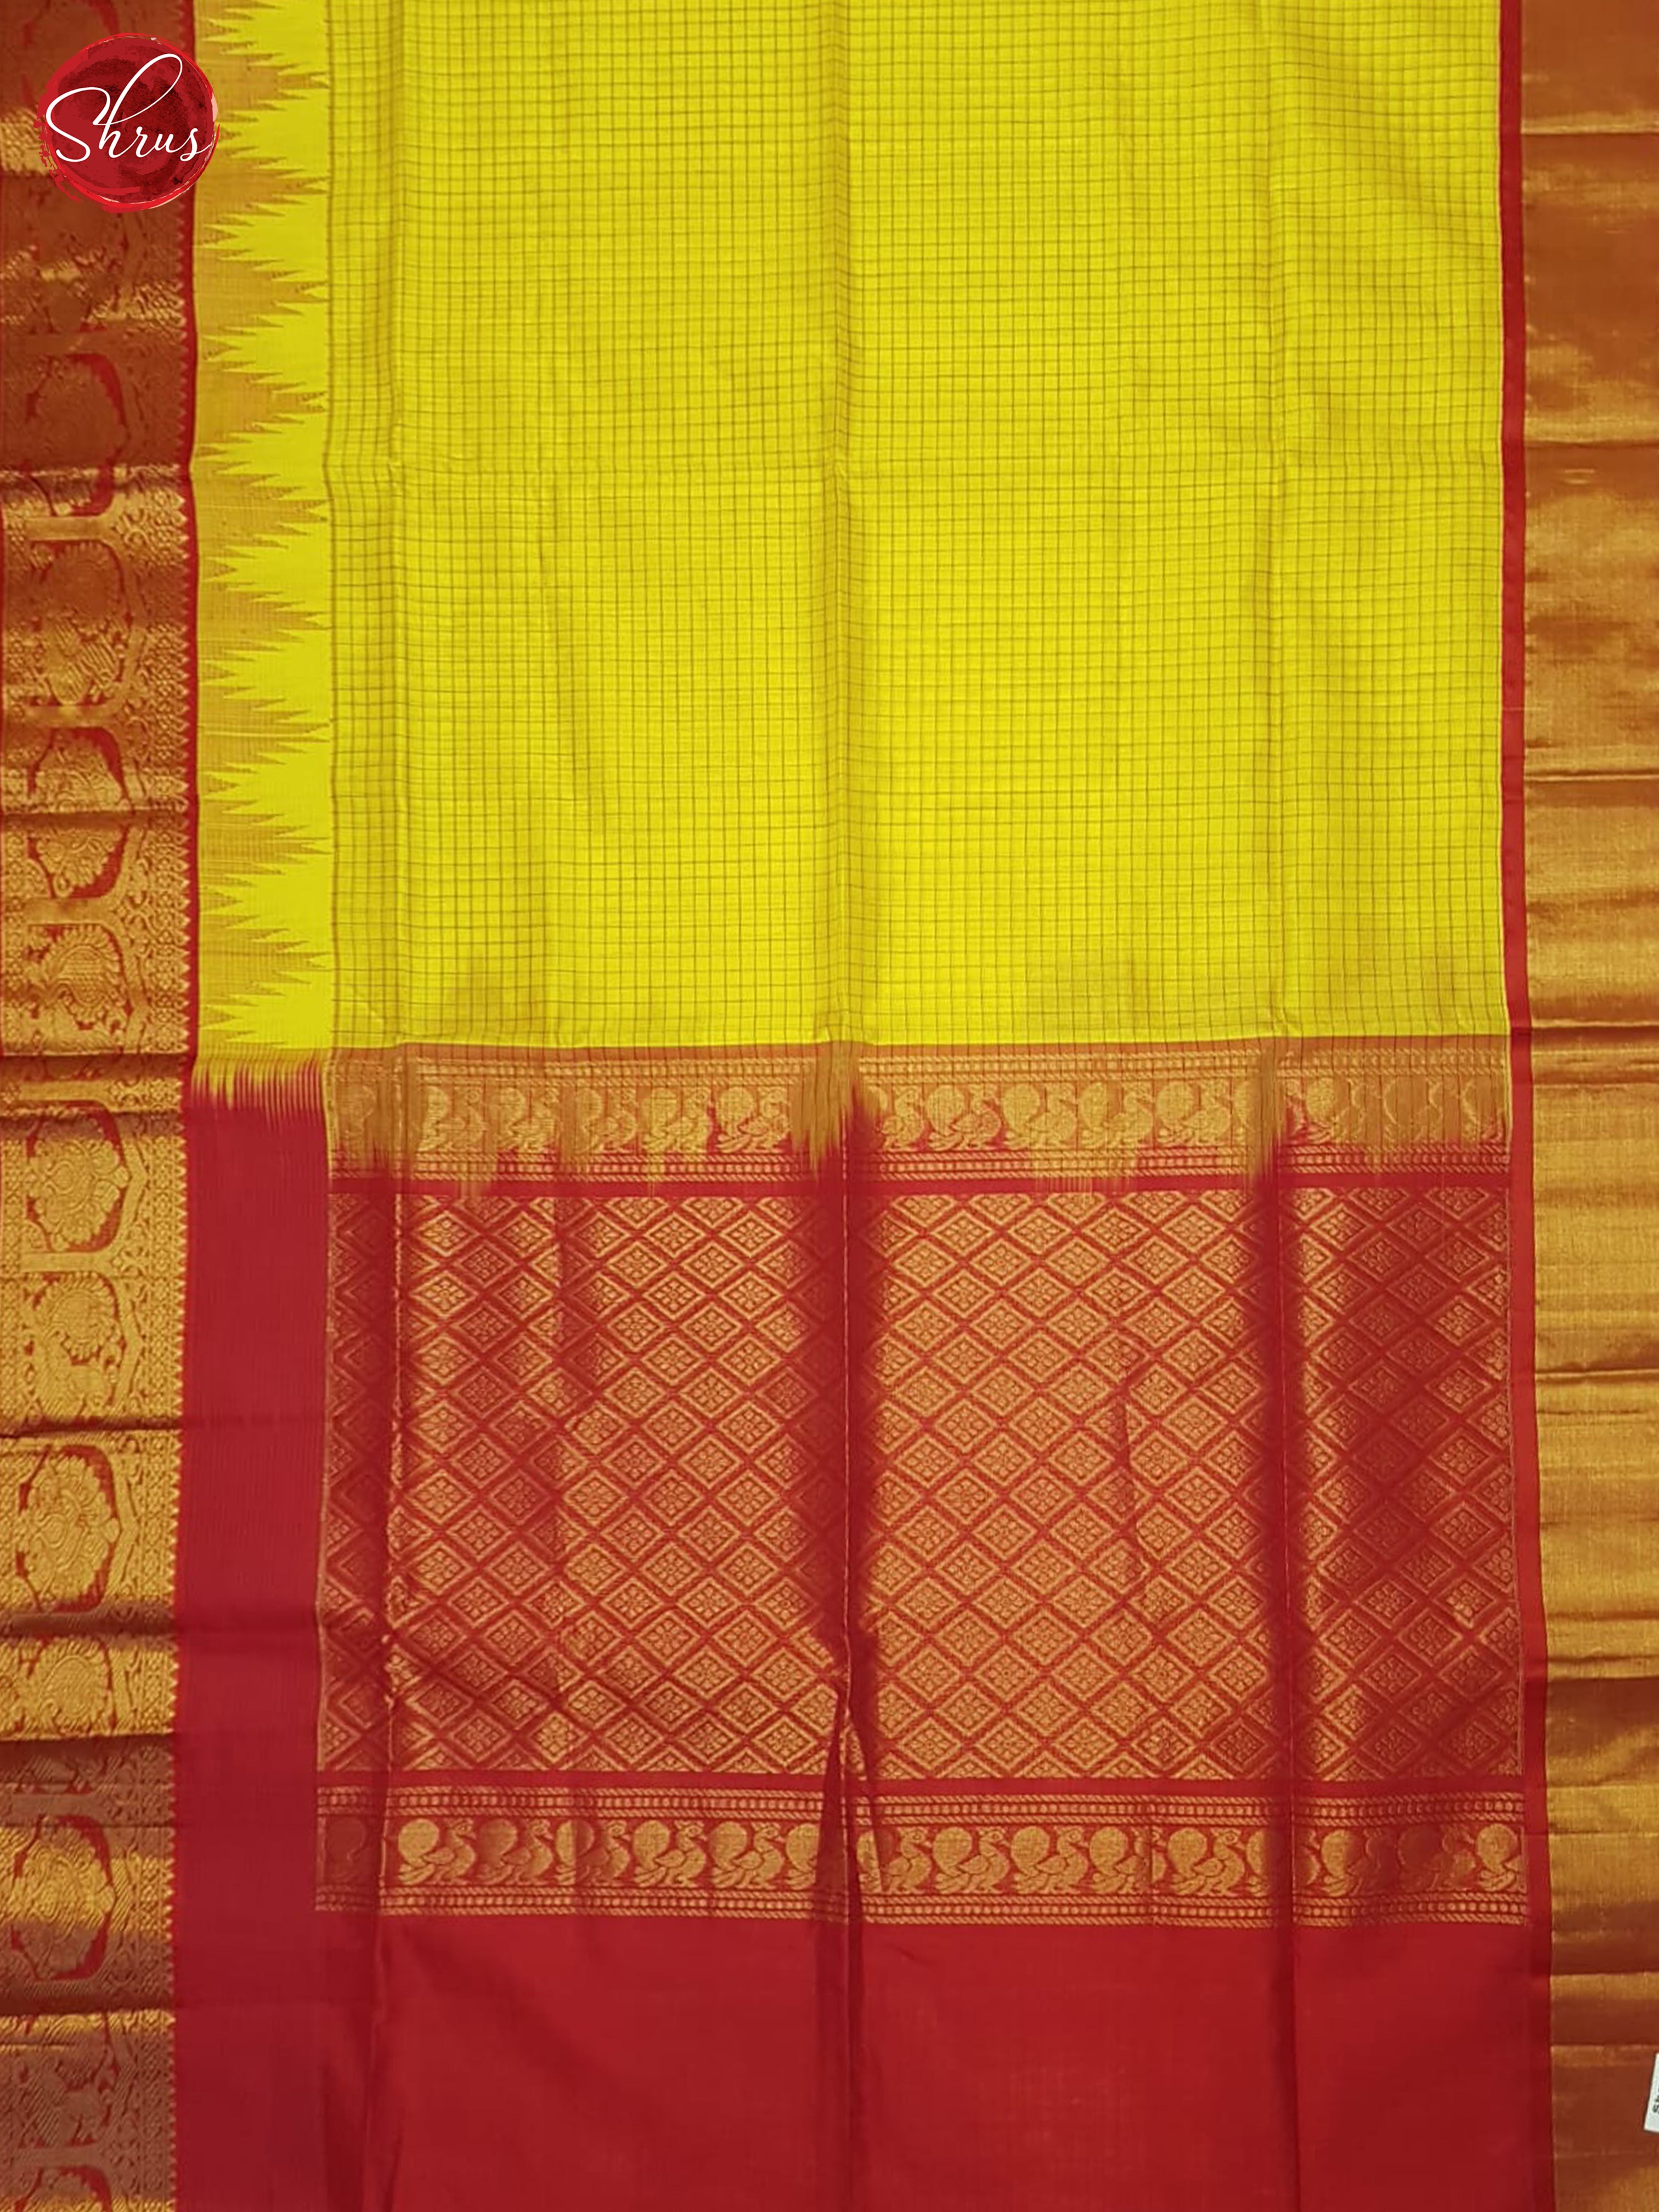 Yellow And Red-Silk cotton saree - Shop on ShrusEternity.com